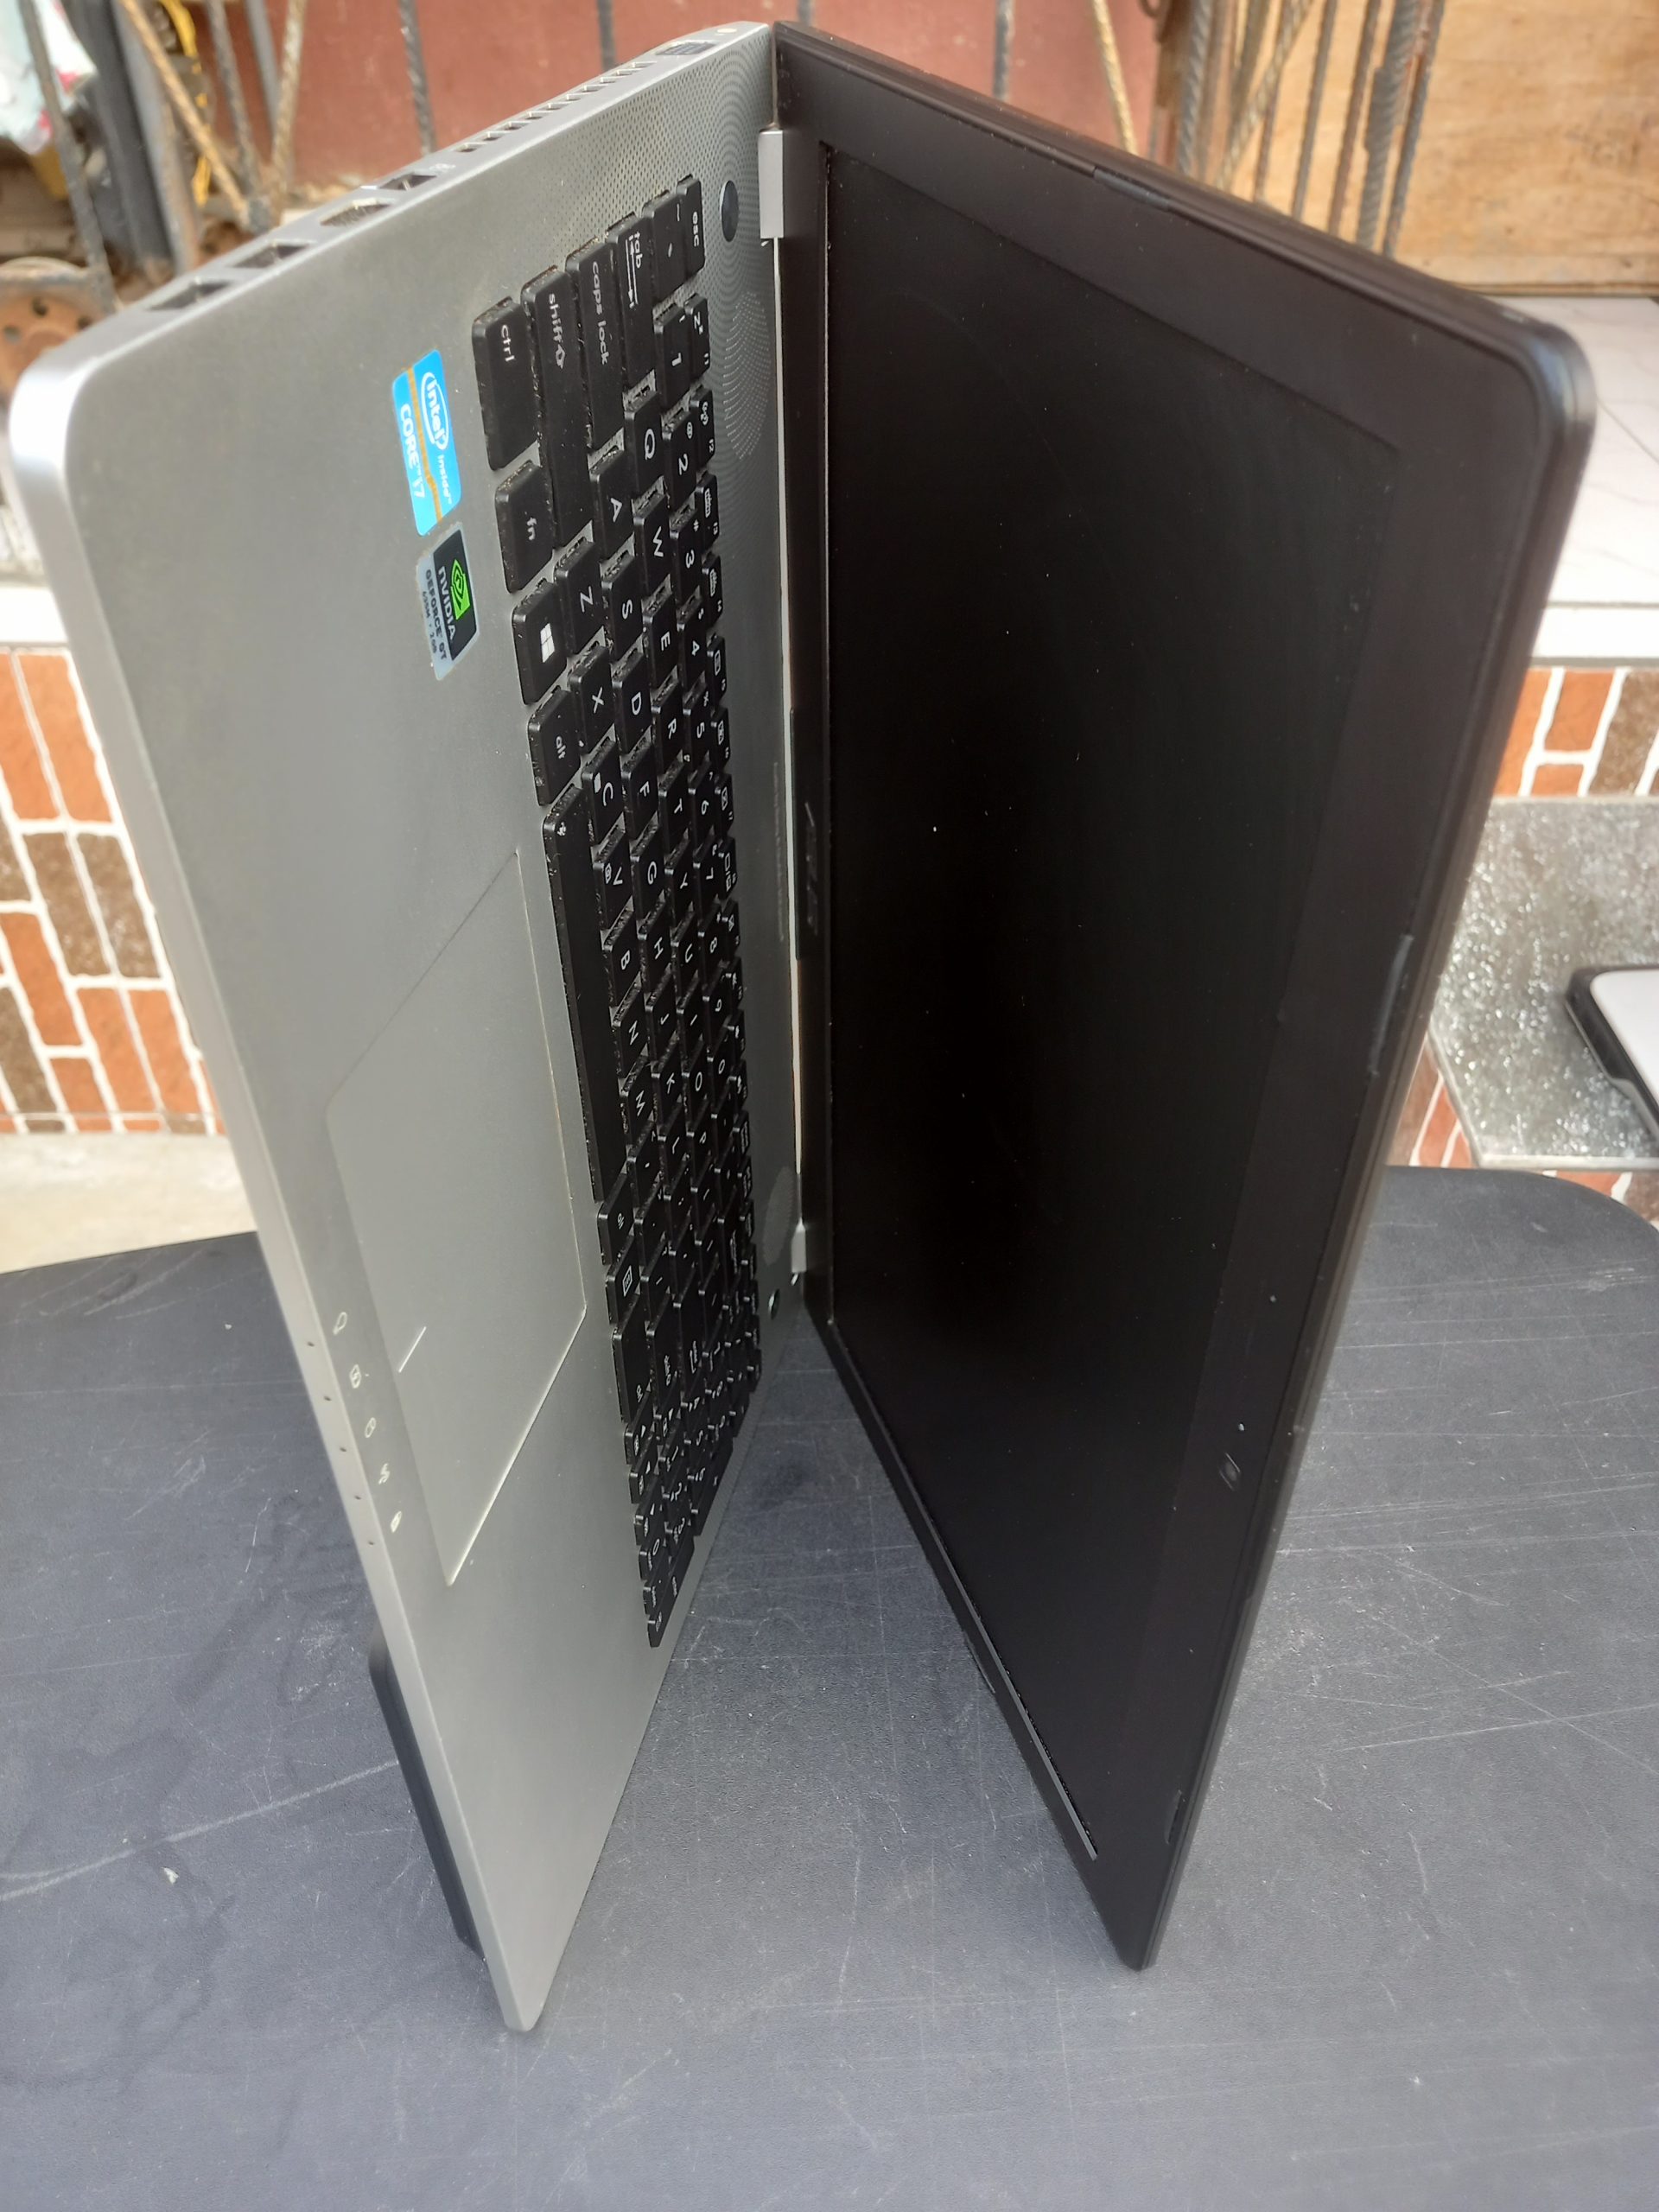 uk used dell e5440 core i5 backlit for sale,London used hp 640 g2 core i5 6th generation , tokumbo used hp 640 g2 core i5 6th generation uk used laptop,American used hp 640 g2 core i5 6th generation , london used laptop , Original laptop , computer shop in lagos , laptop for sale in lagos , computer stores in lagos nigeria , wholesale computer shop in lagos nigeria , laptop supply shops/store in lagos , Hp laptop for sale , dell laptops for sale , buy laptops online, lenovo laptop for sale , shopeinverse store in lagos , hp envy x360 convertible, hp envy laptop for sale, shopinverse computer , shopinverse laptops , note books computers , Dell latitude 7440 for sale, Dell latitude 7440 core i5 500gb hdd 4g ram camera good battery life , very portable and lightweight and very durable direct uk used american standard. second hand laptop, cheap laptop for sale in lagos , laptop charger for sale in lagos, original wholes sale laptop charger for sale in lagos computer village nigeria laptop repair shop in lagos, gbn mobile computers , gbn mobile laptops /computers store, computer village lagos ikeja shops , laptops for sale in computer village , cheap laptops in computer village , laptop warehouse in lagos nigeria, computer warehouse in ikeja computer , buy/swap laptops in ikeja computer village , laptop pay on delivery in lagos ikeja , laptops with good Guarantee /warranty shop in lagos,Uk used Asus N56V8 camera core i7 500GB HDD 6GB RAM keyboard light 2GB Invidia dedicated GeForce graphic card